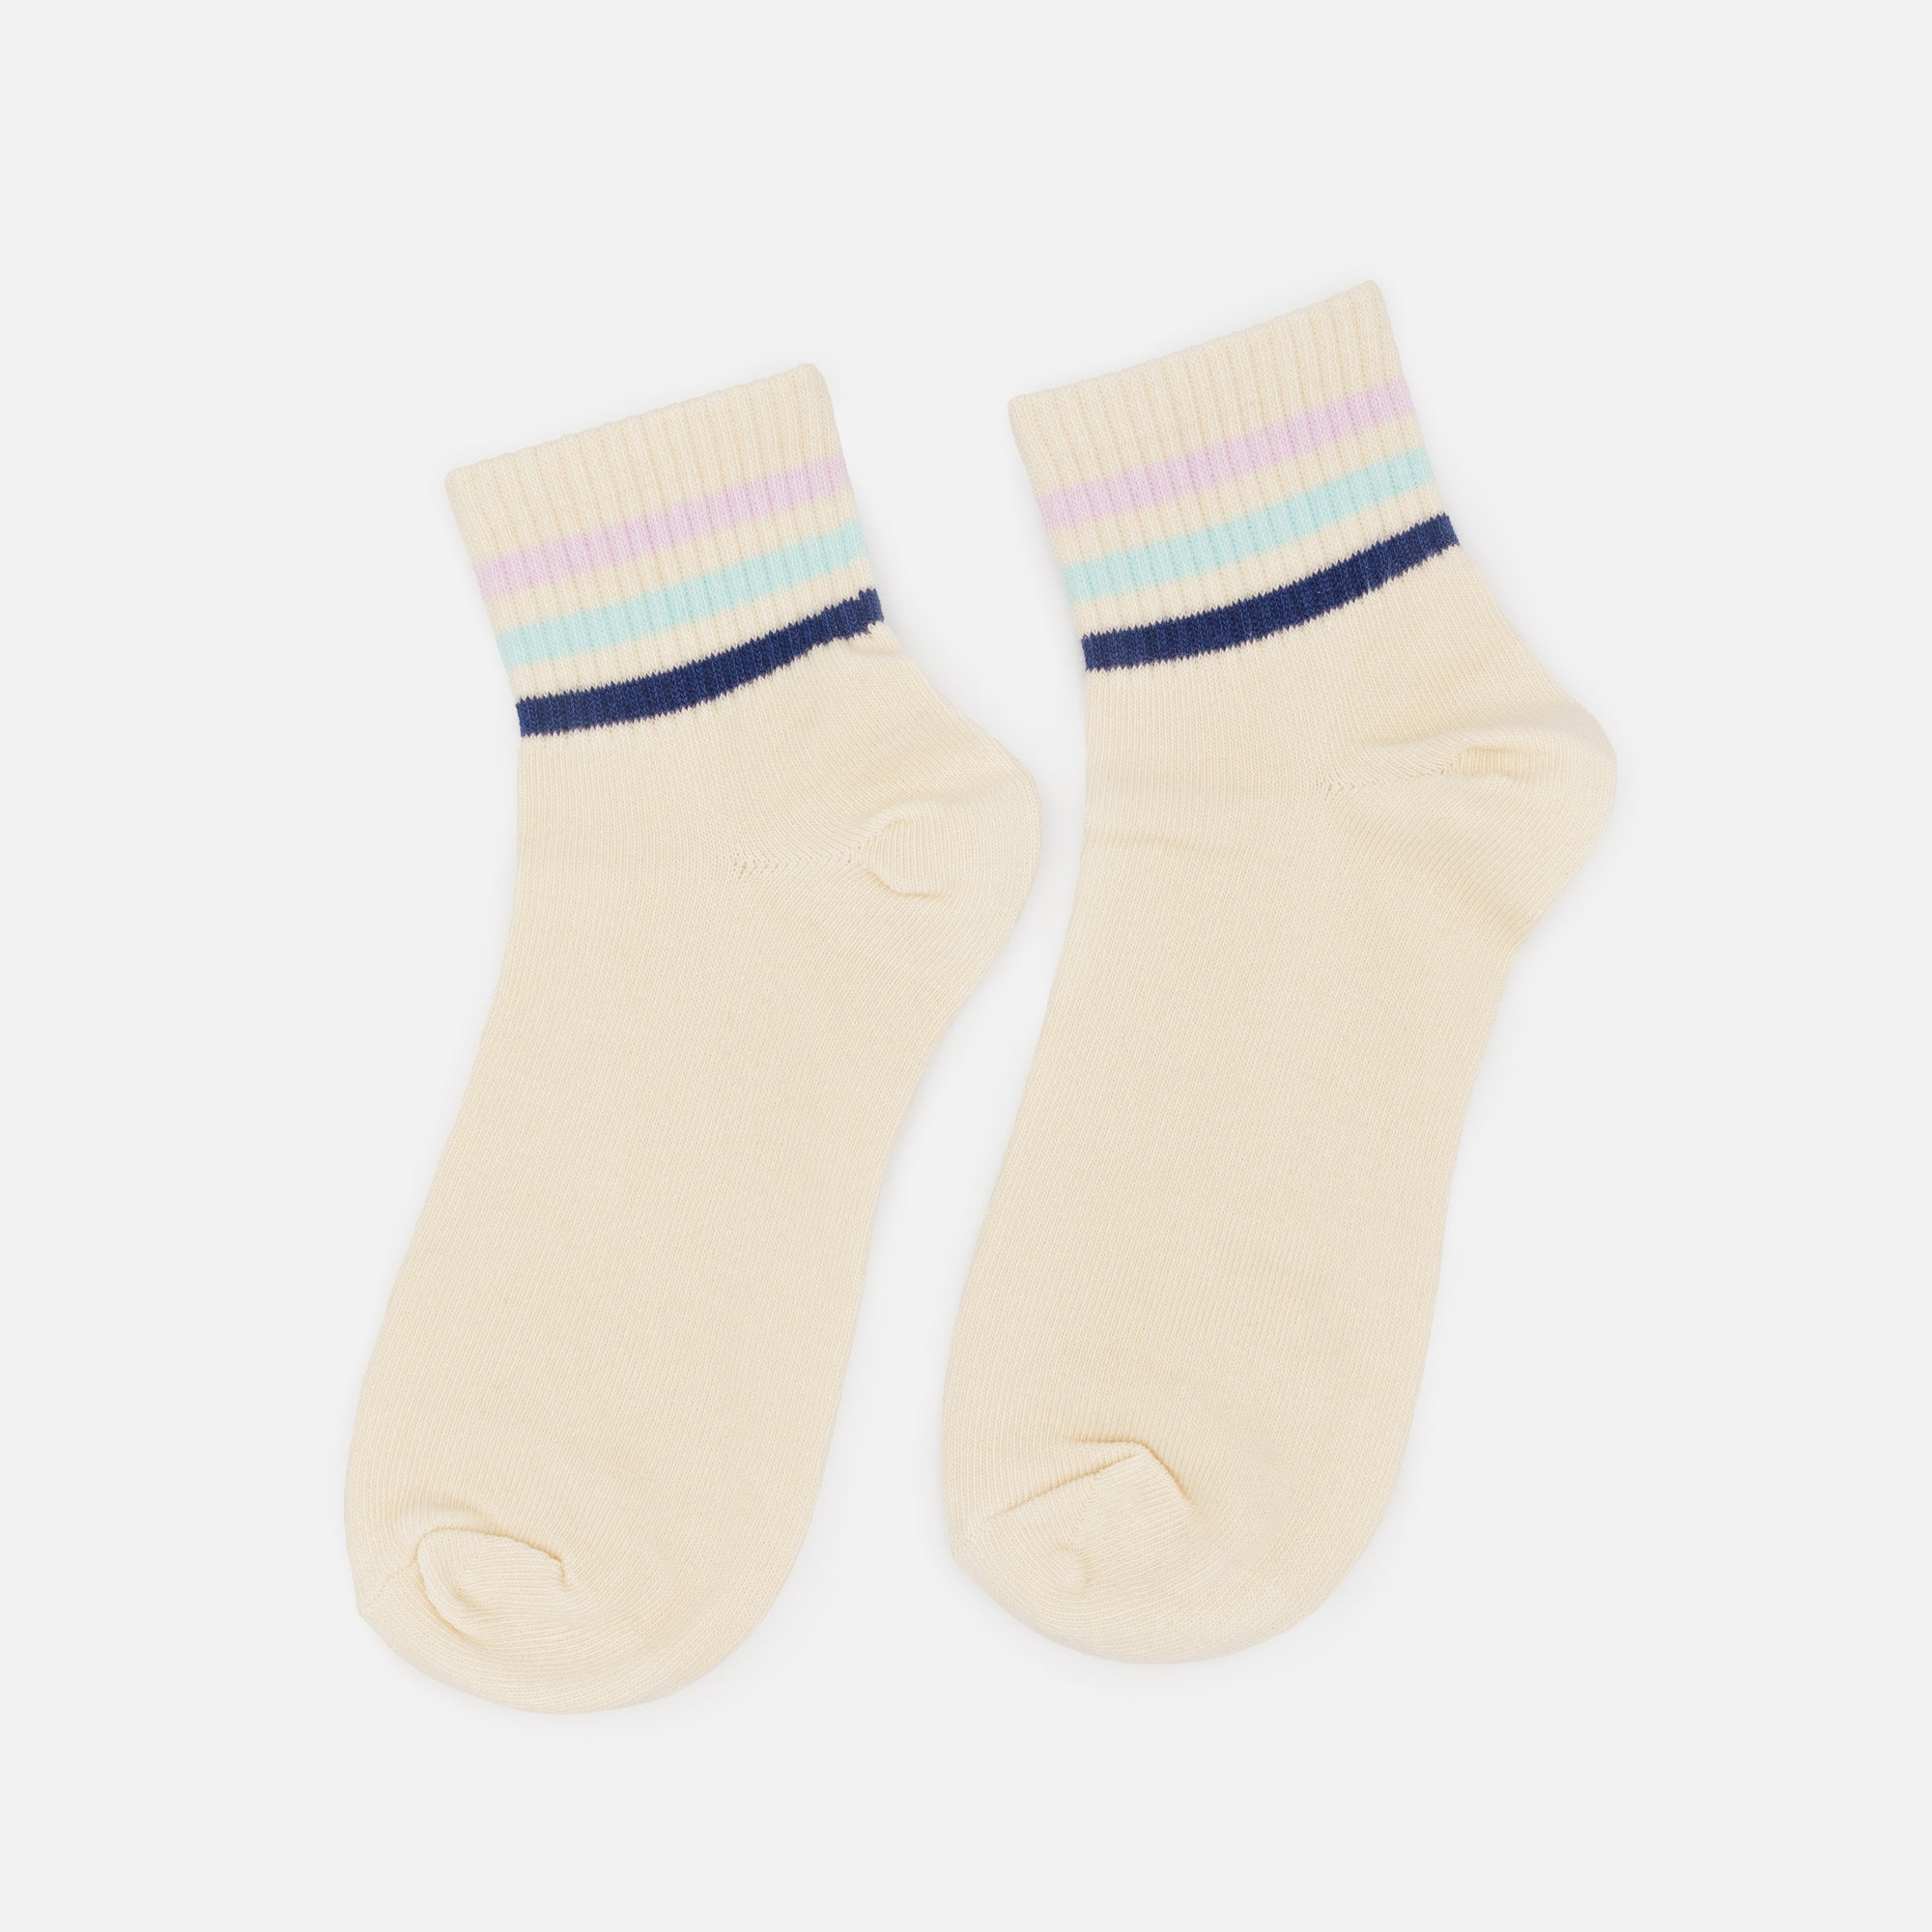 Mid-length cream stockings with multi-colored stripes